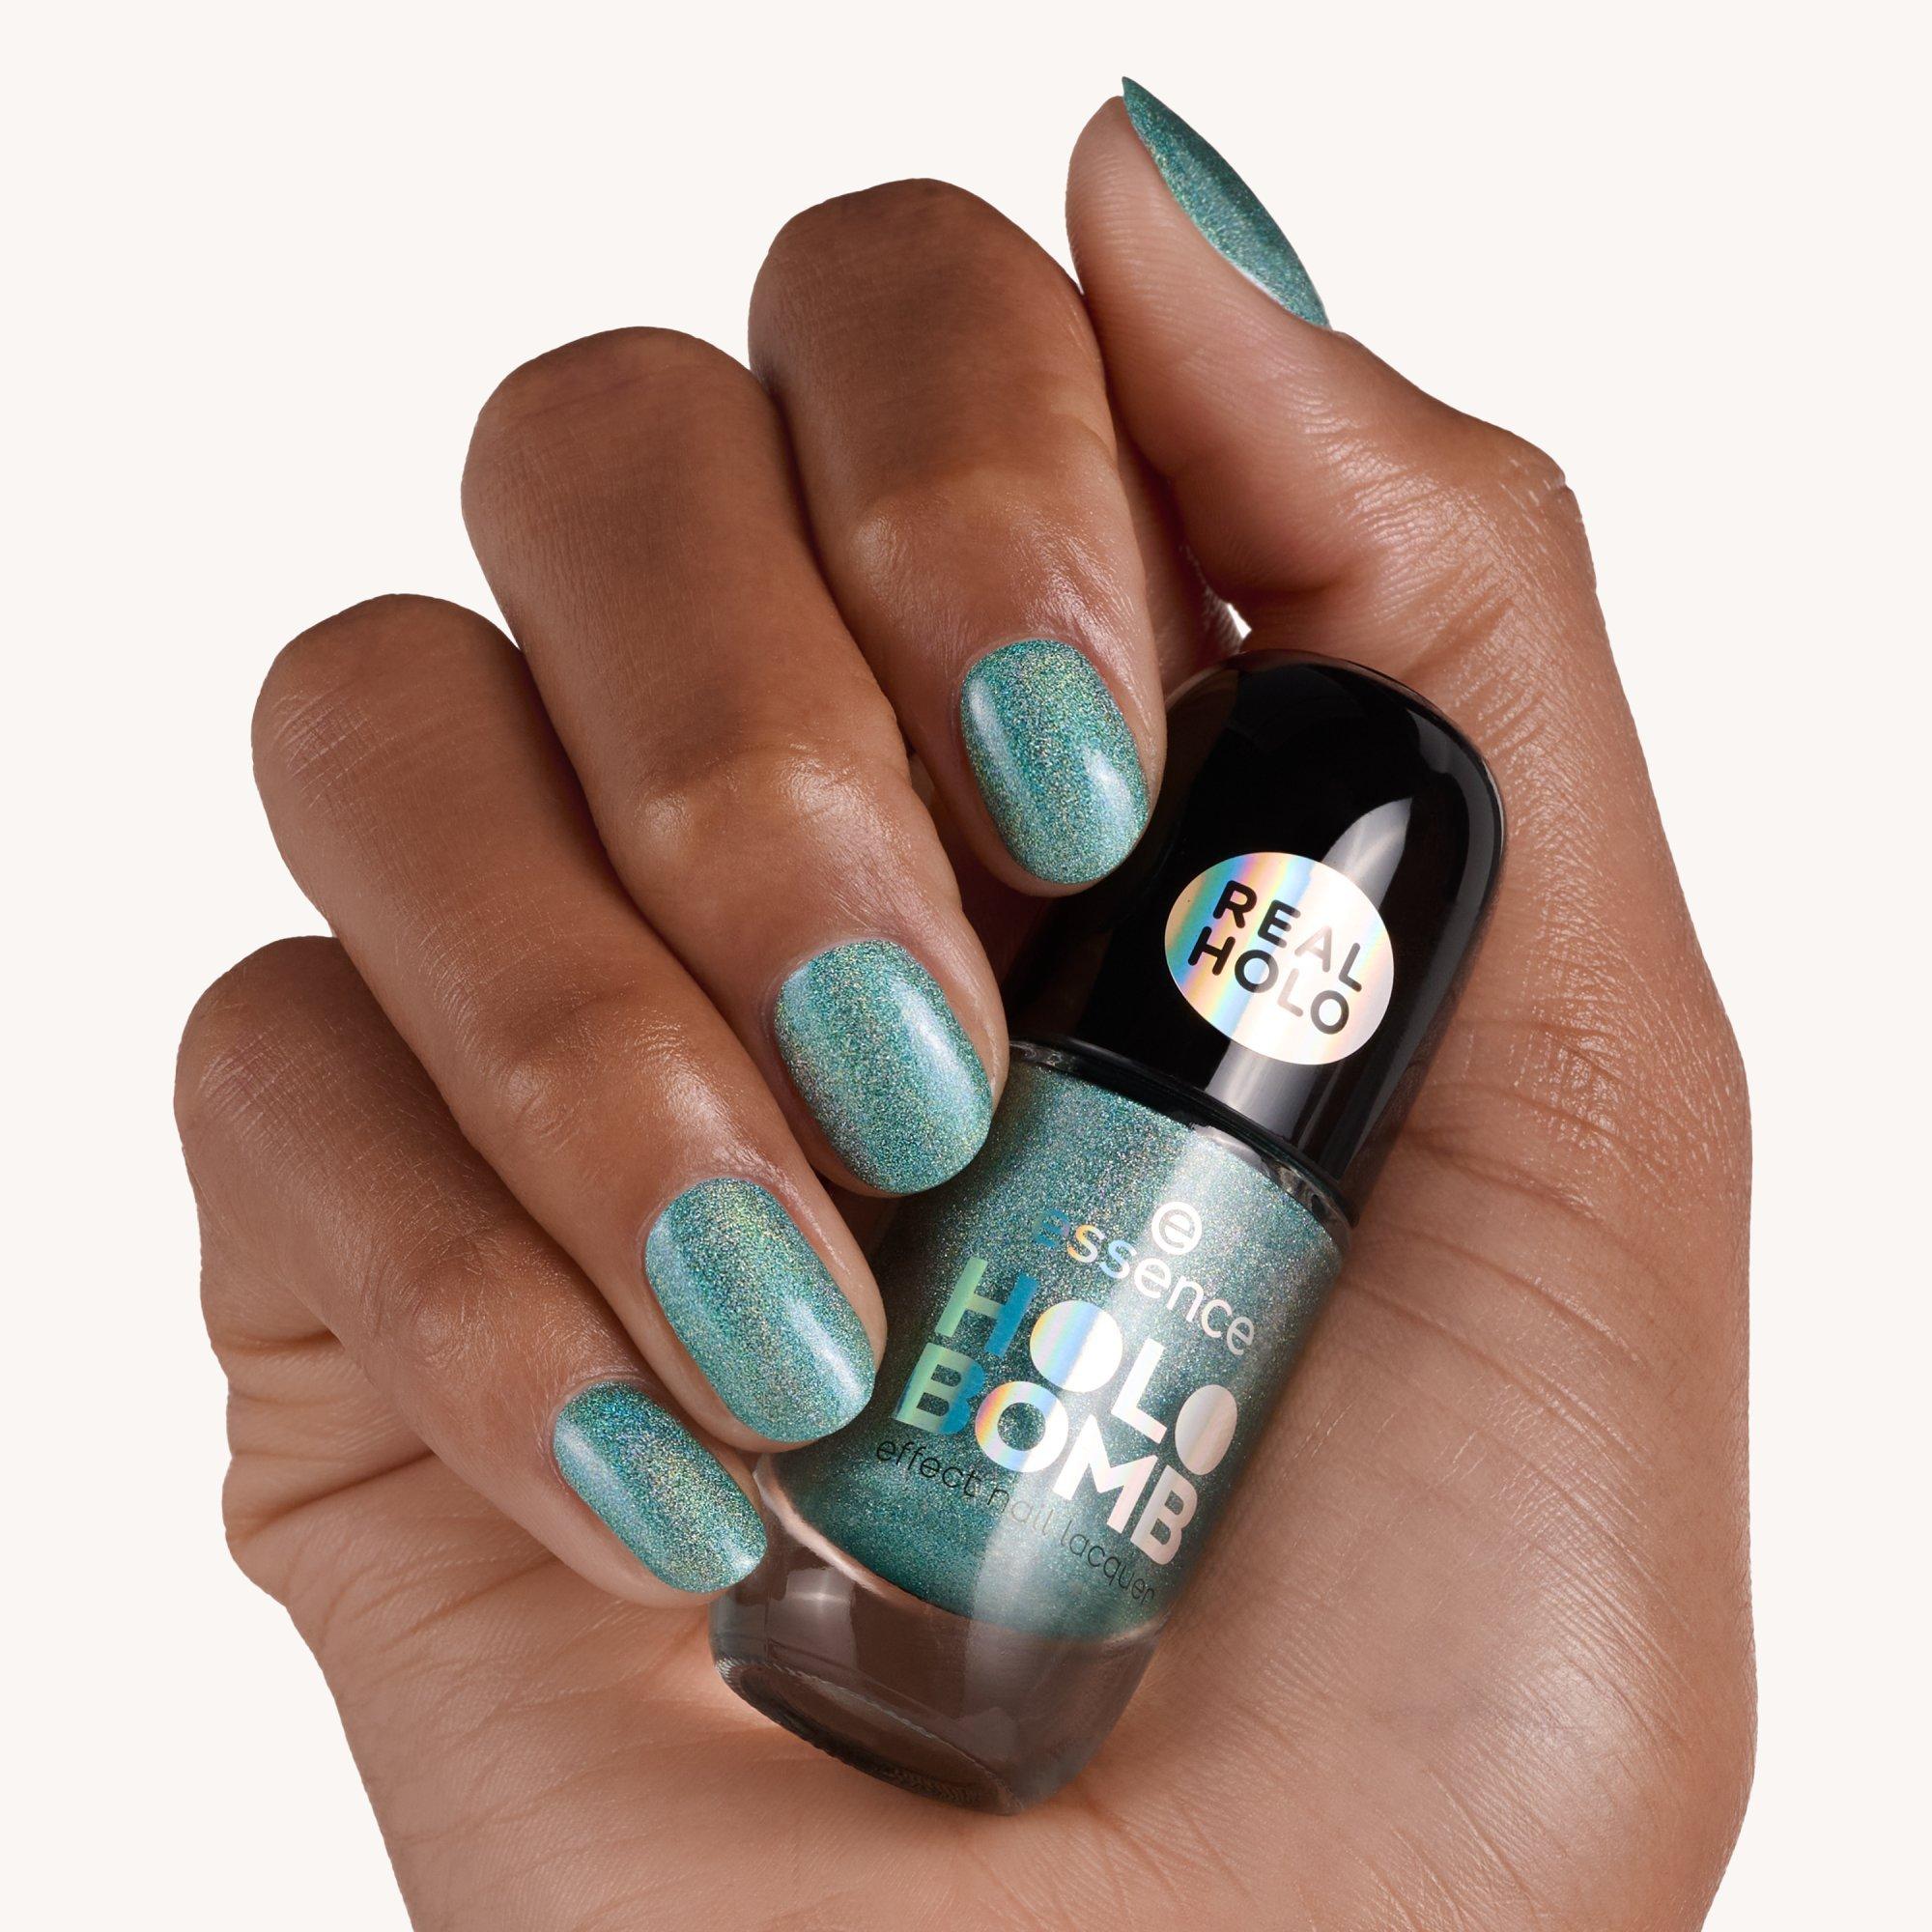 HOLO BOMB effect nail lacquer vernis ongles